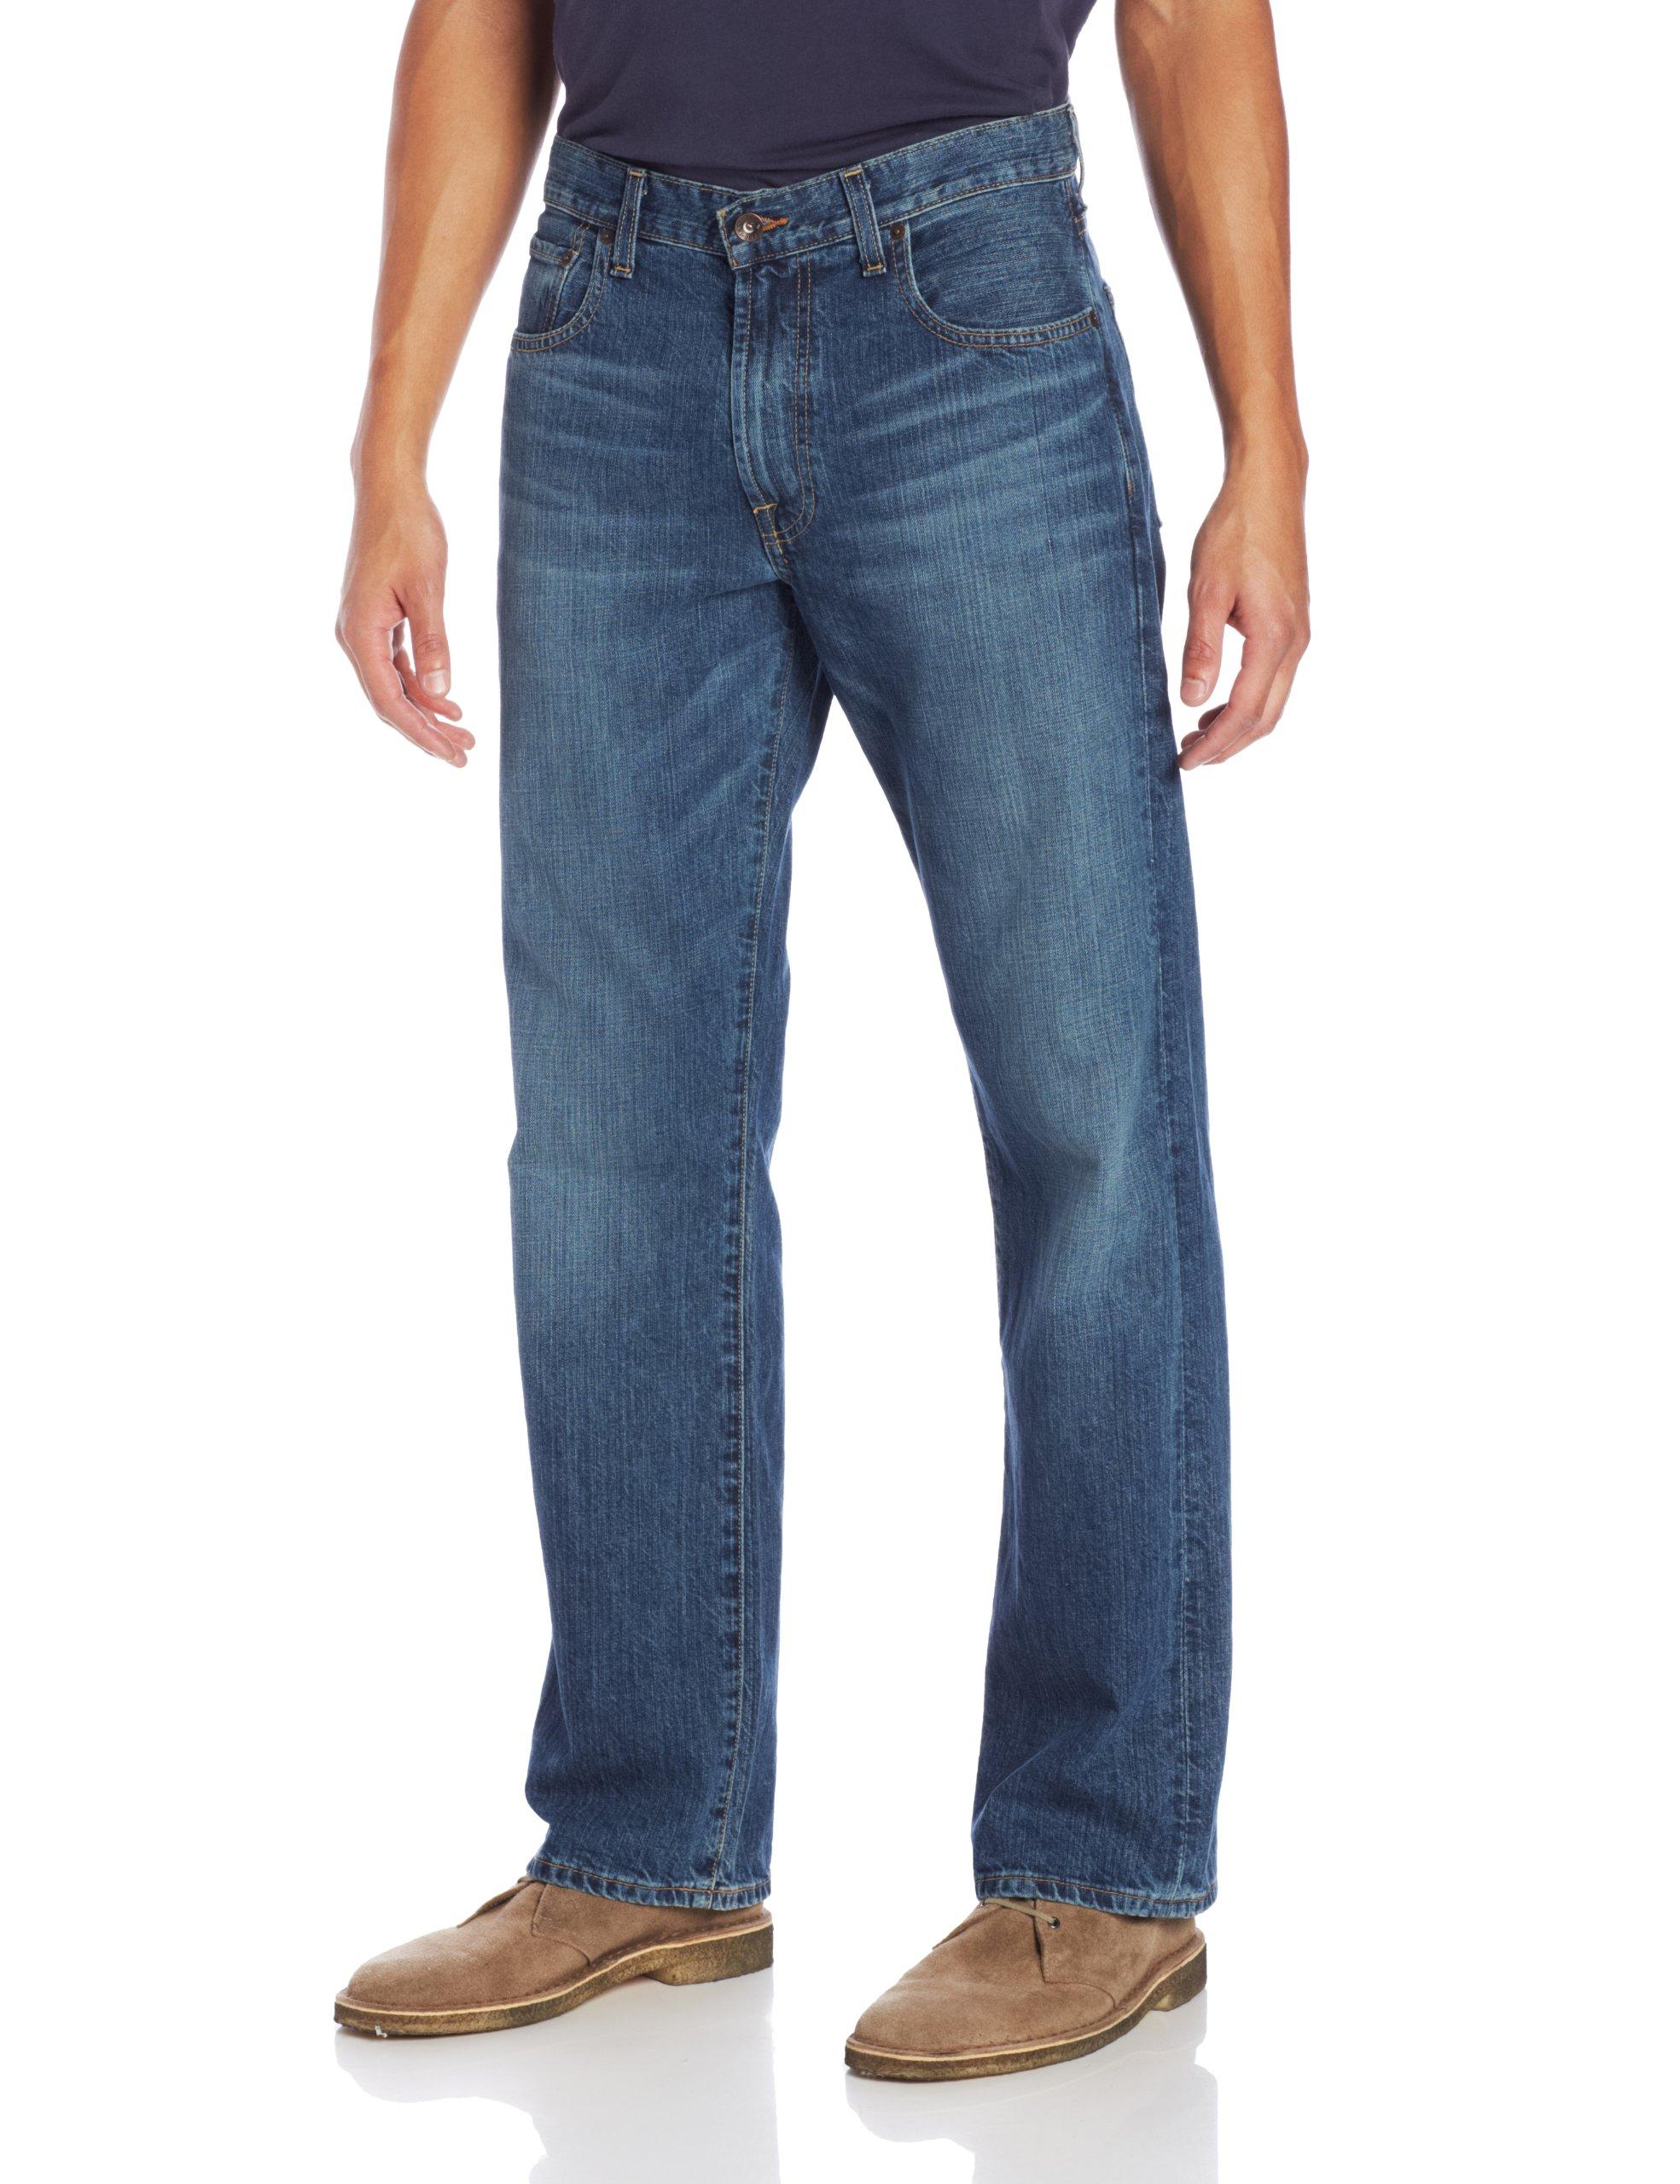 Lucky Brand 181 Relaxed Straight Jean in Blue for Men - Lyst